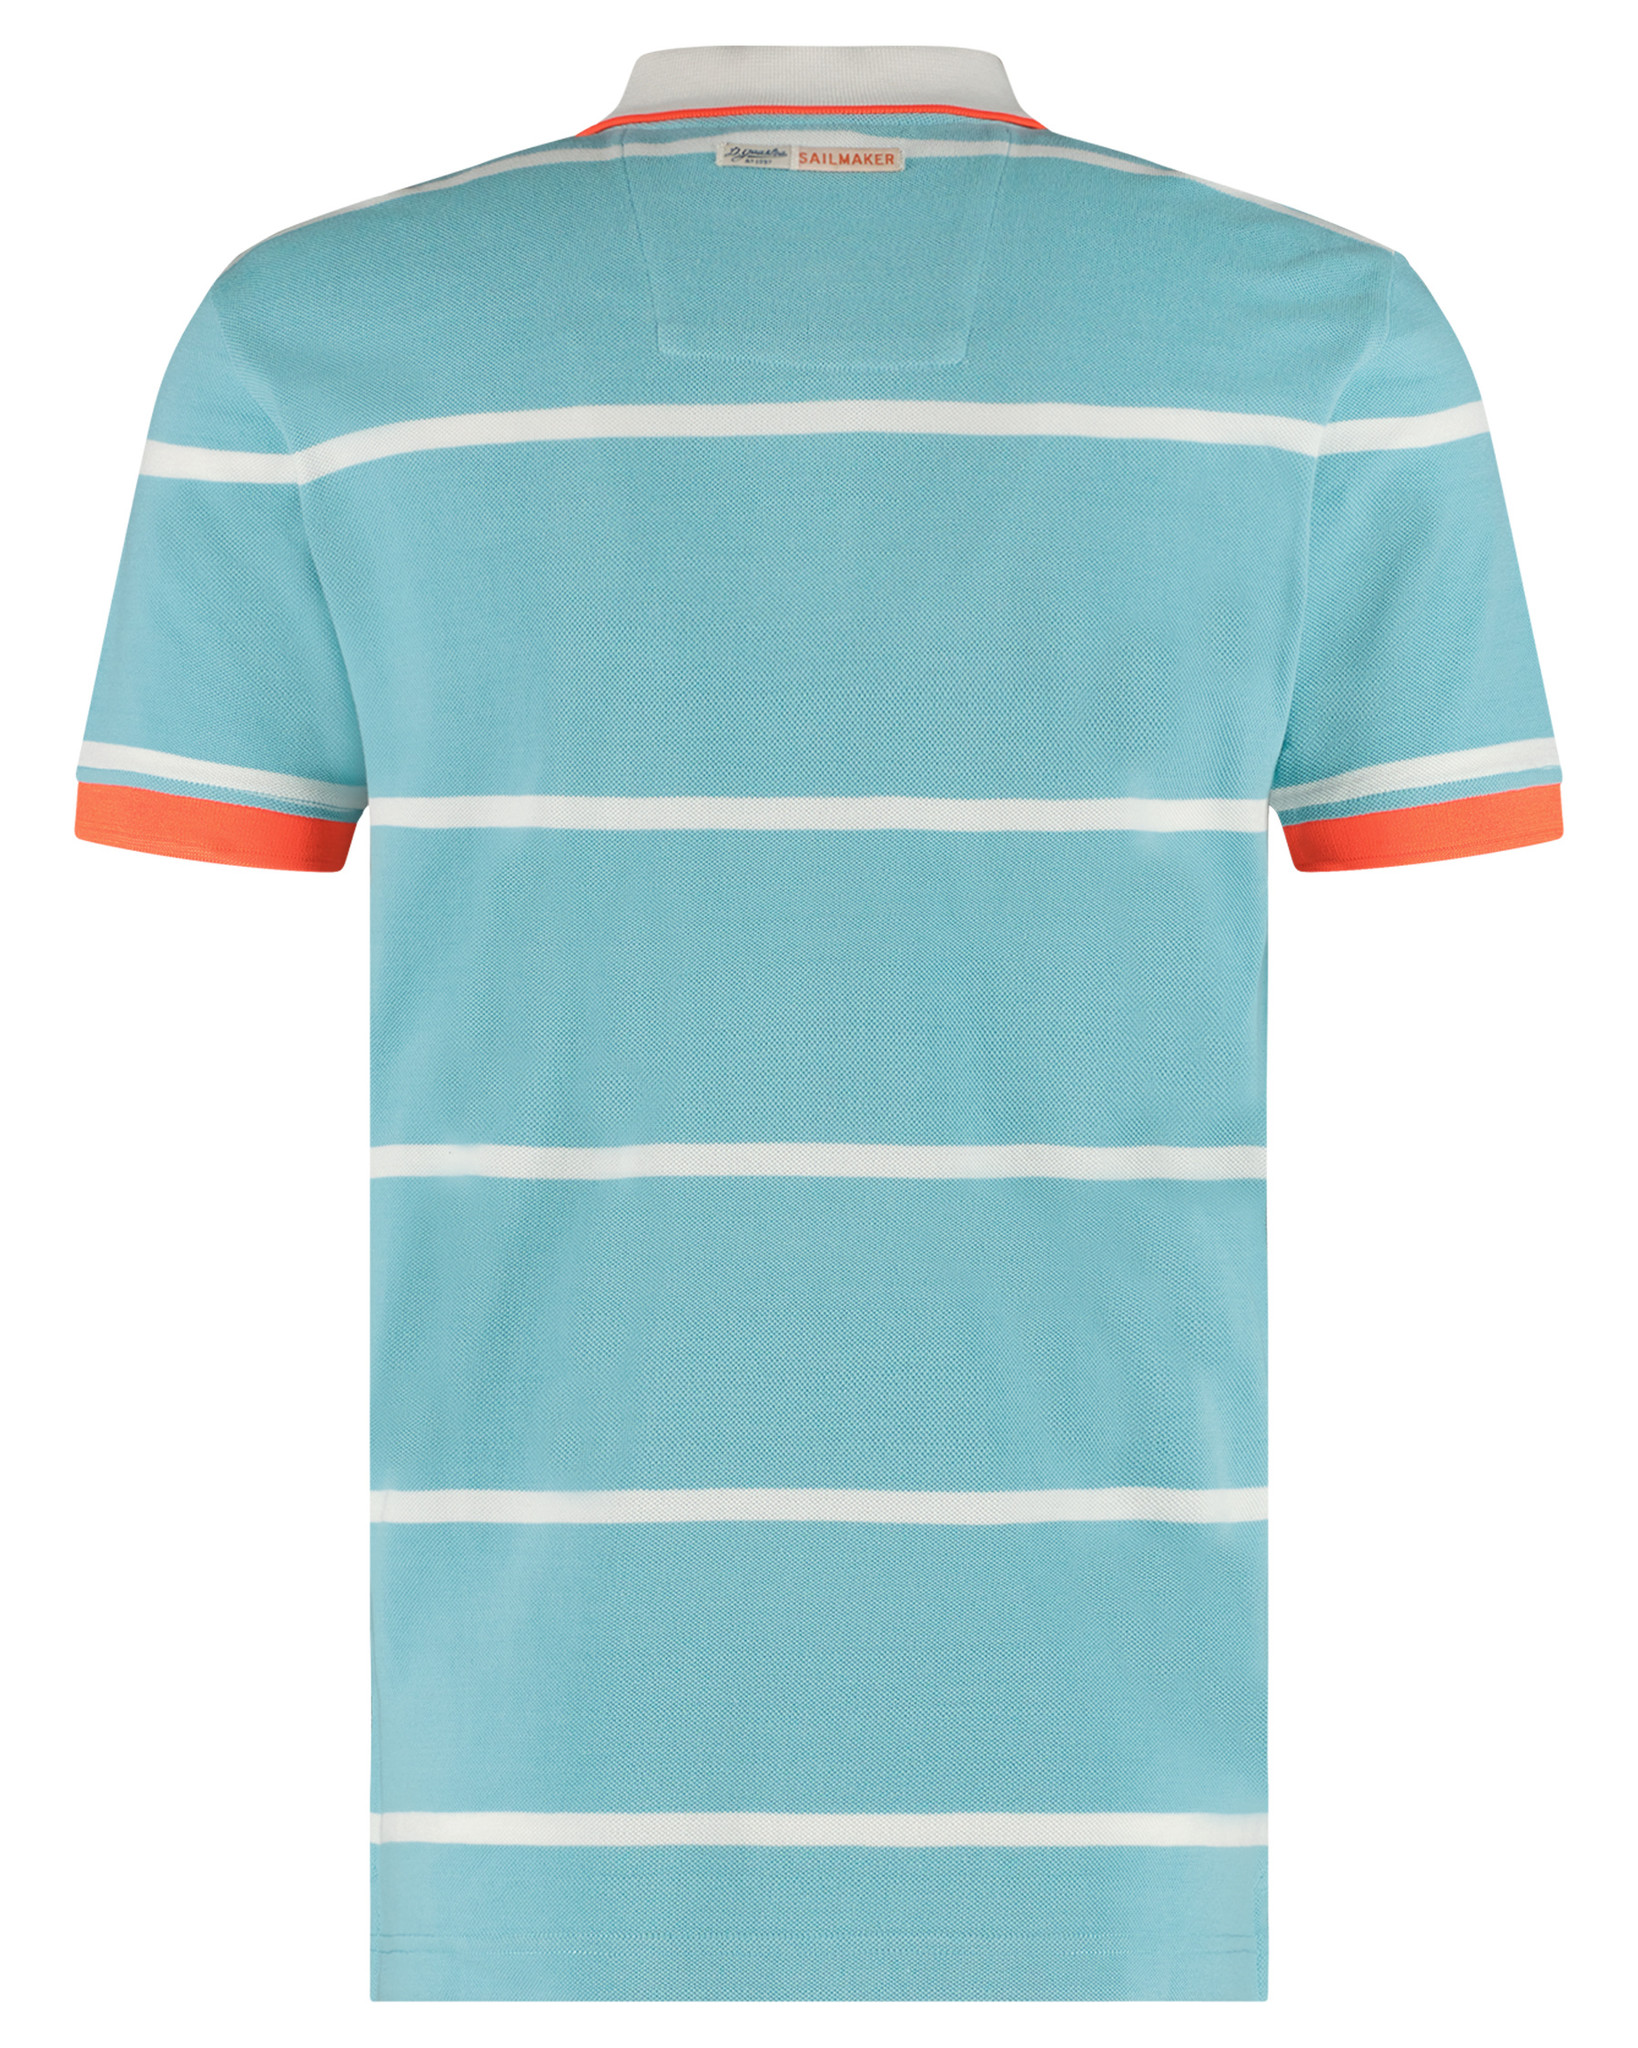 Polo Jake with striped pattern